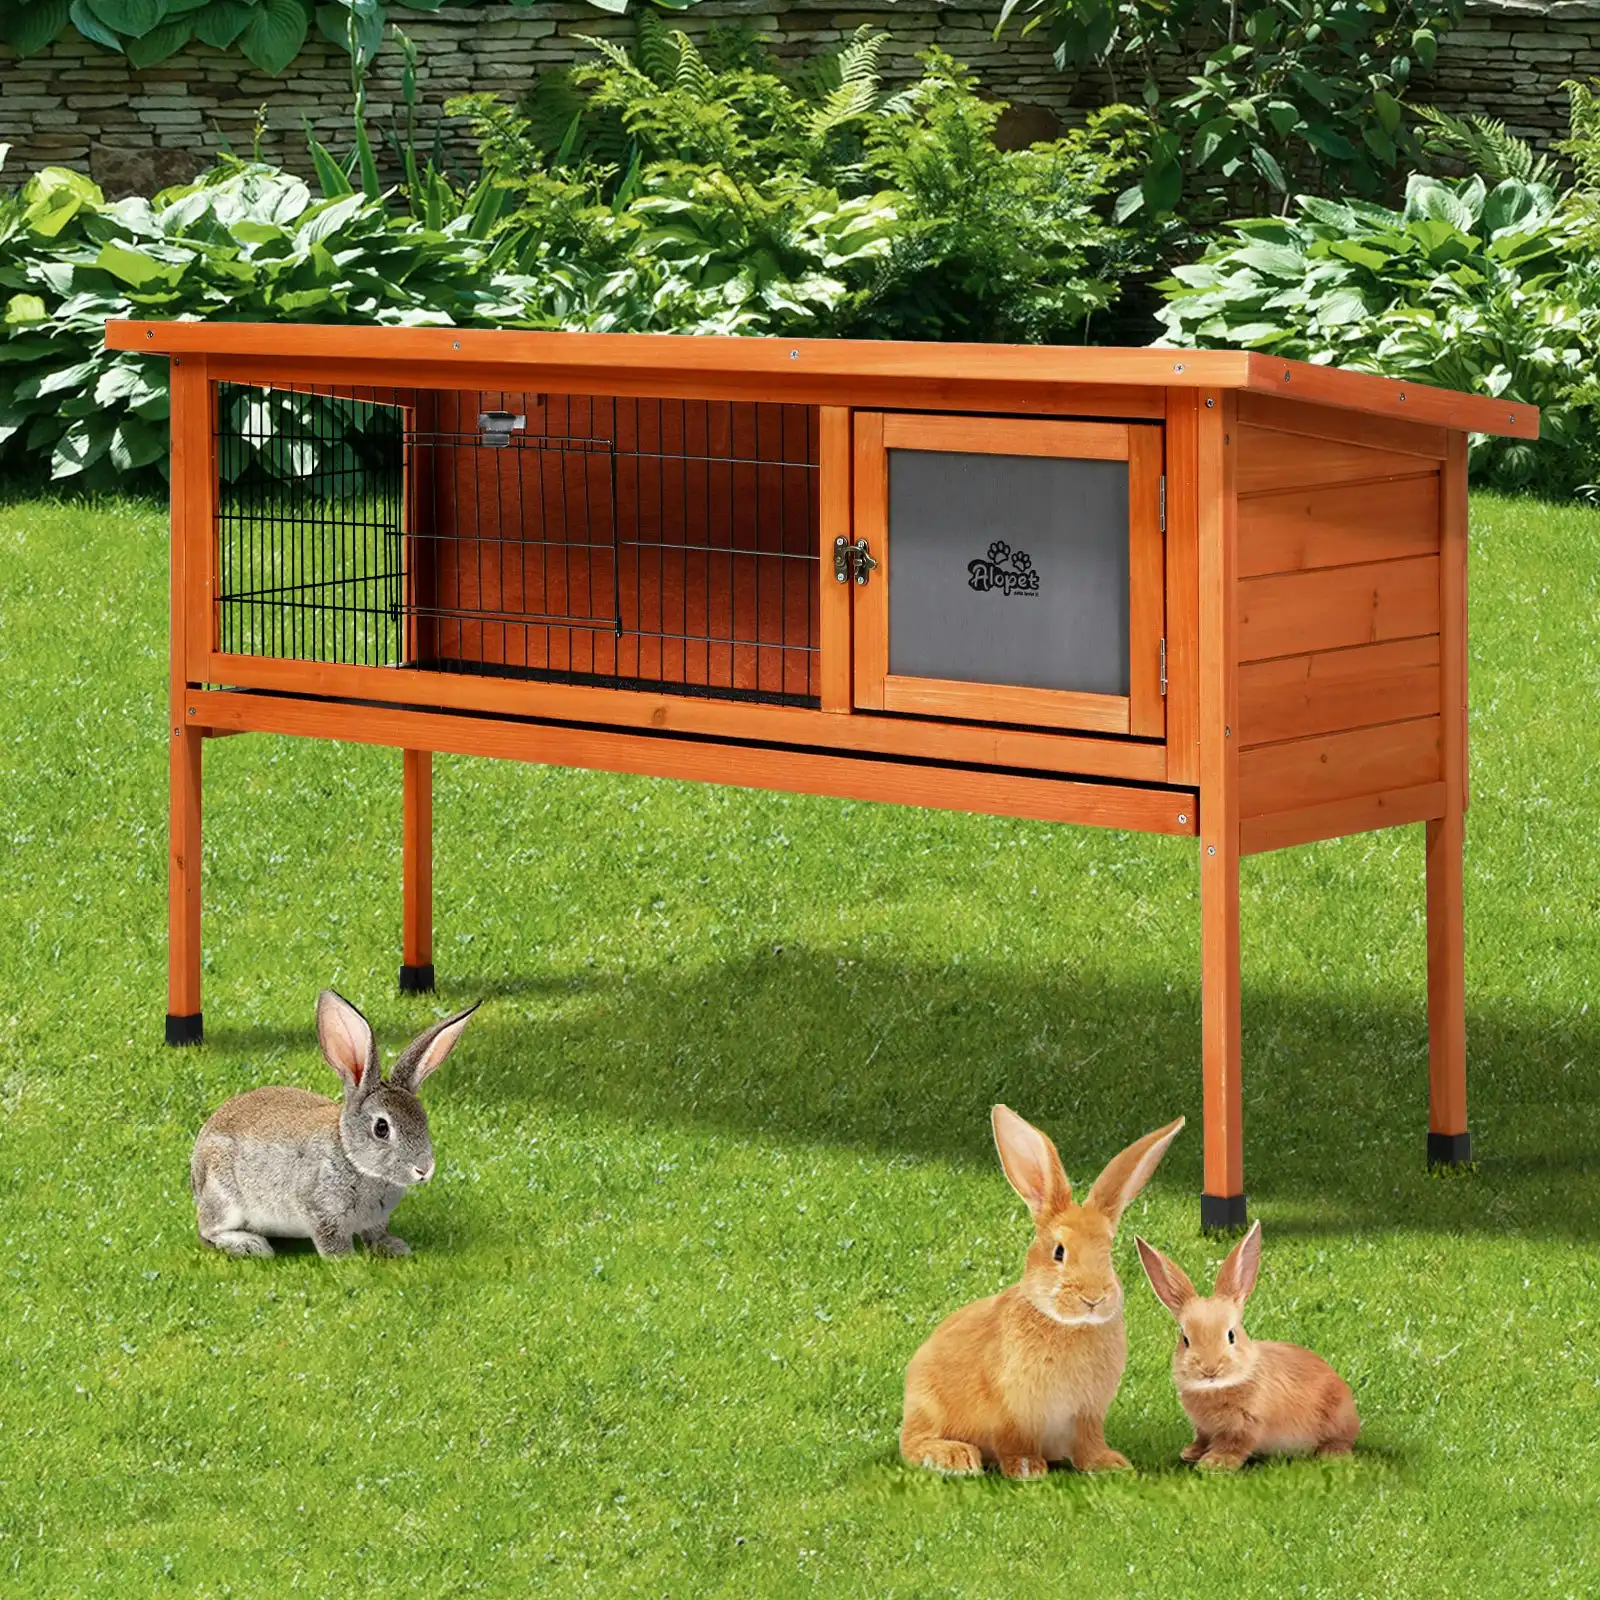 Alopet Large Rabbit Hutch Wooden Cage Enclosure Chicken Coop 122cm House Outdoor